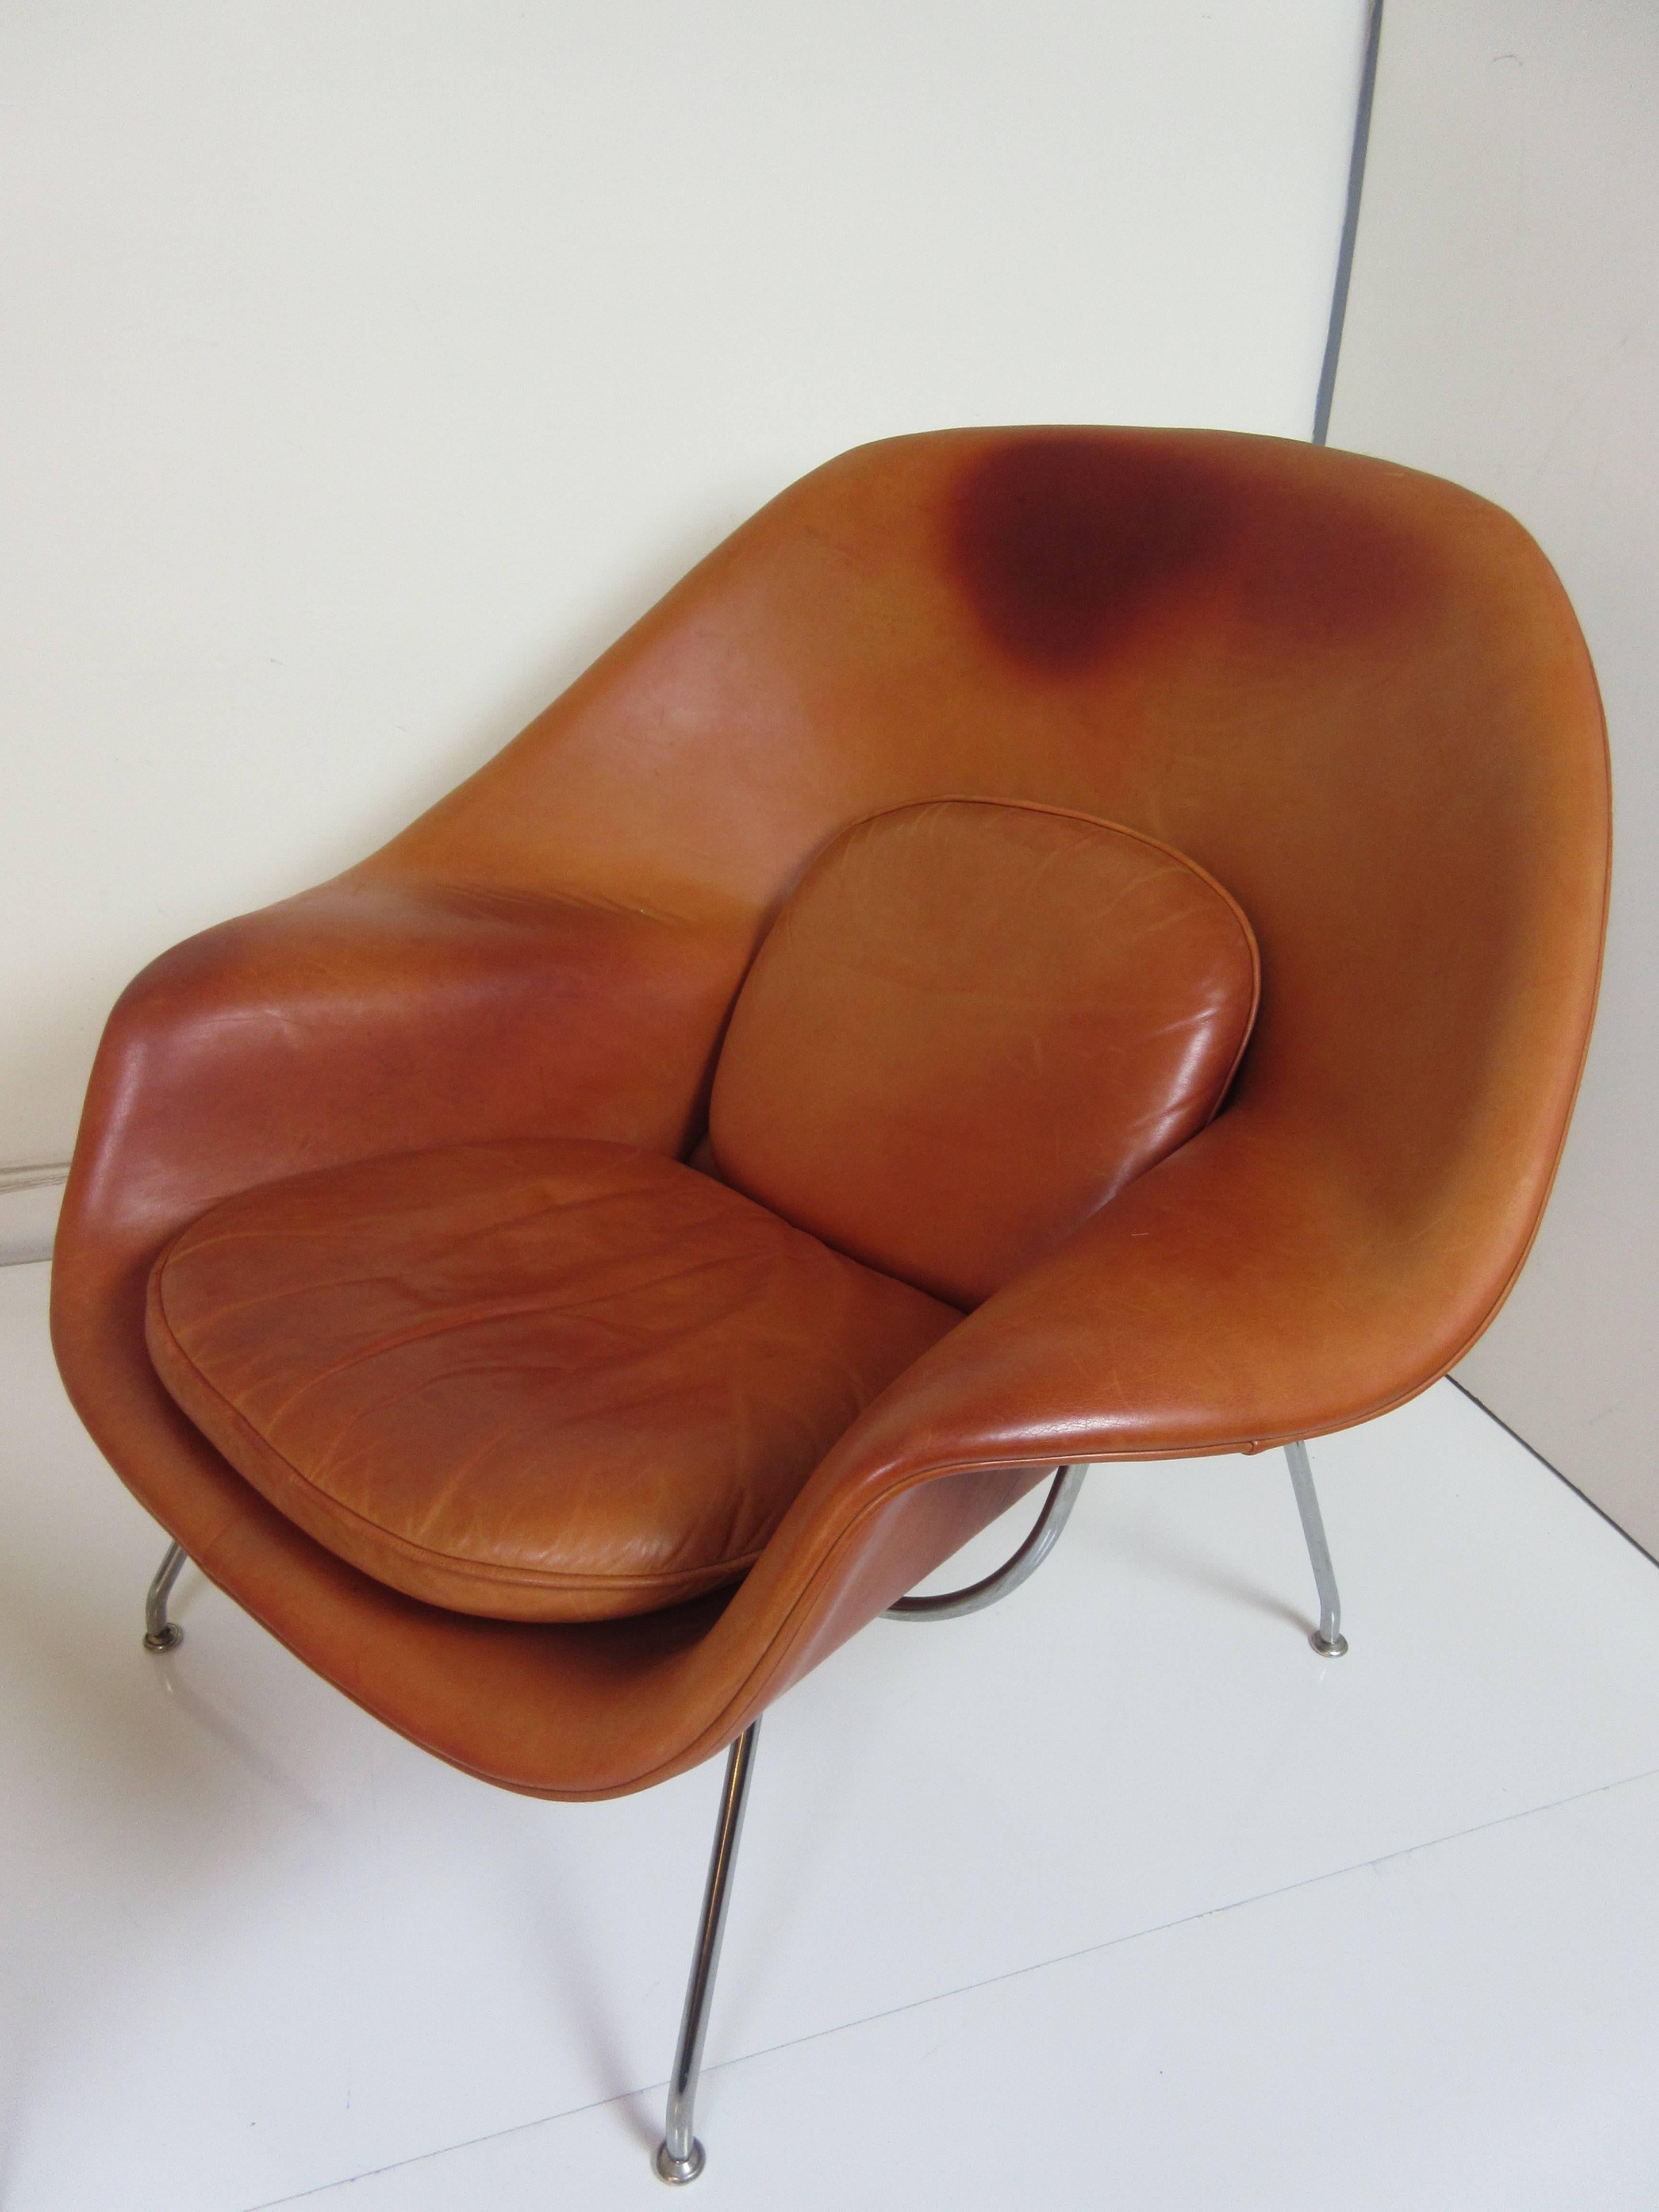 Like a favourite pair of worn gloves, or an old oiled baseball mitt this Saarinen for Knoll Womb Chair and ottoman has a richly patinated Spinneybeck Leather in a Sienna Burnt orange color. Chair and ottoman show a very even faded appearance.